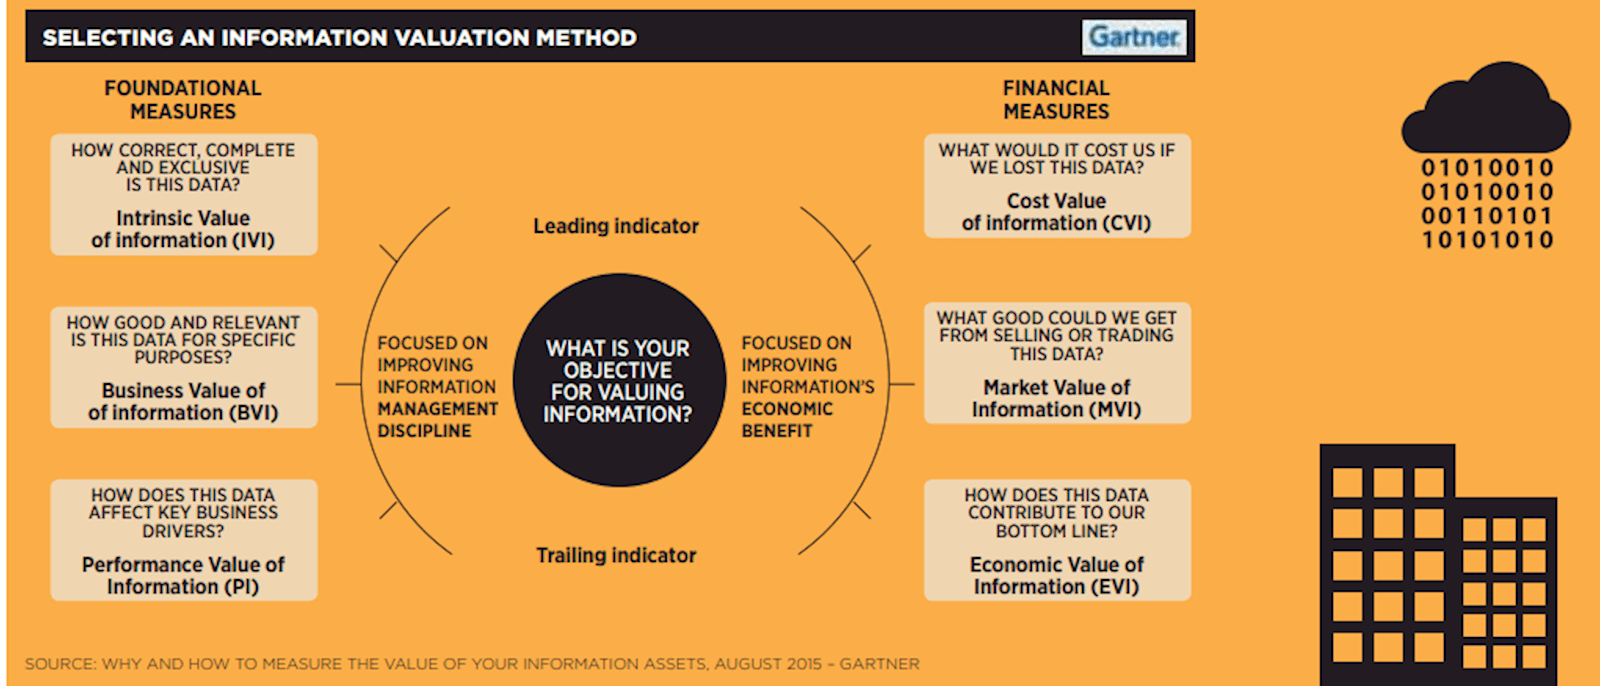 Figure 1: Selecting an information valuation method